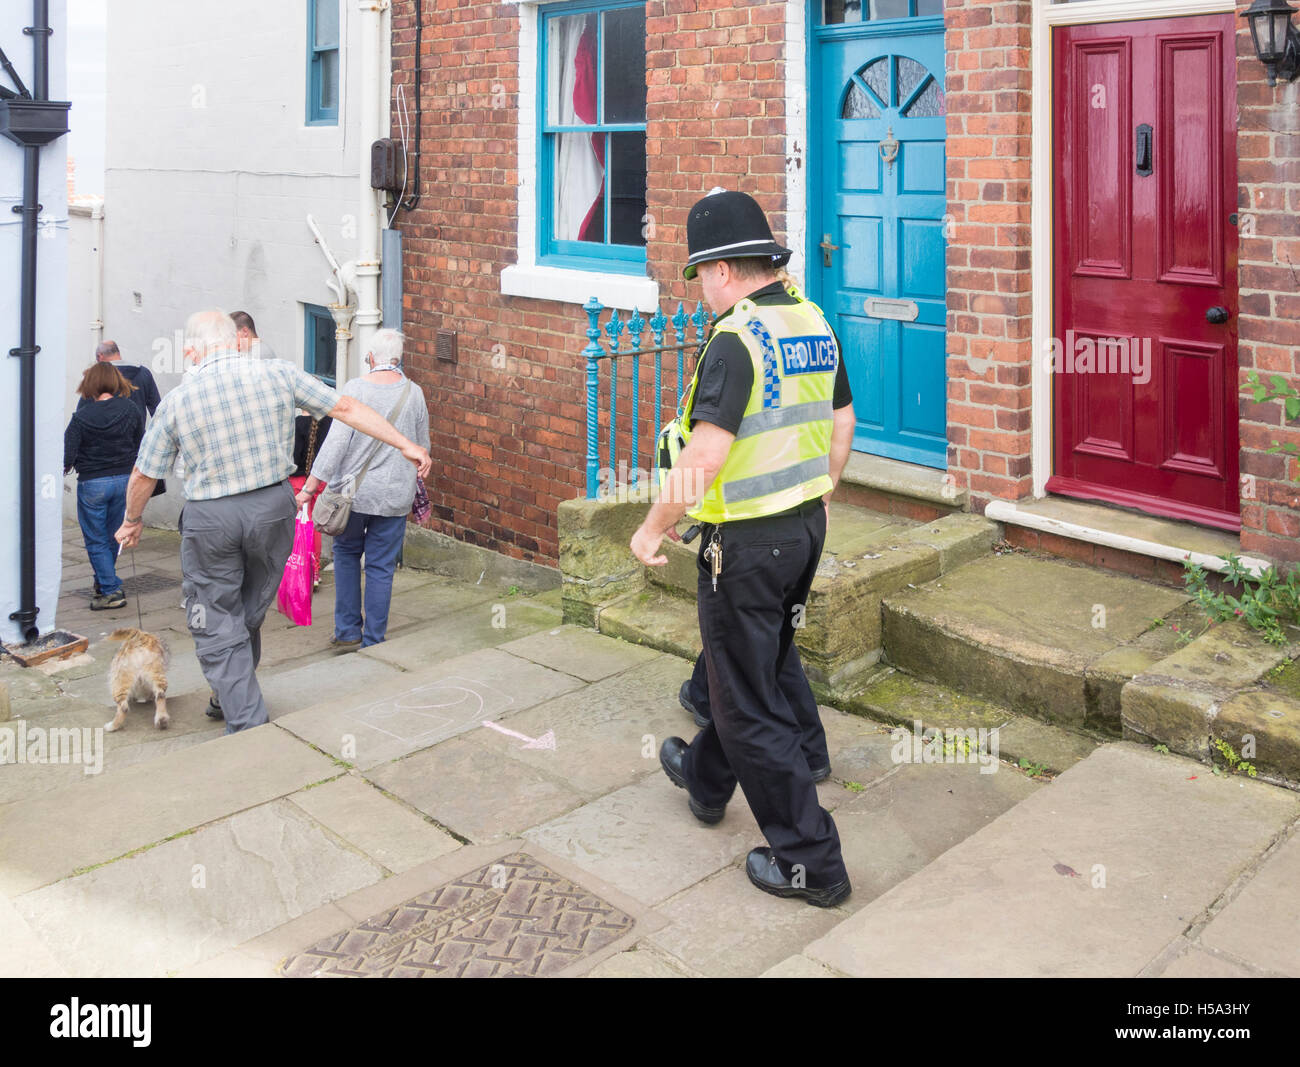 Male policeman and female police support community officer in village street in England. UK Stock Photo